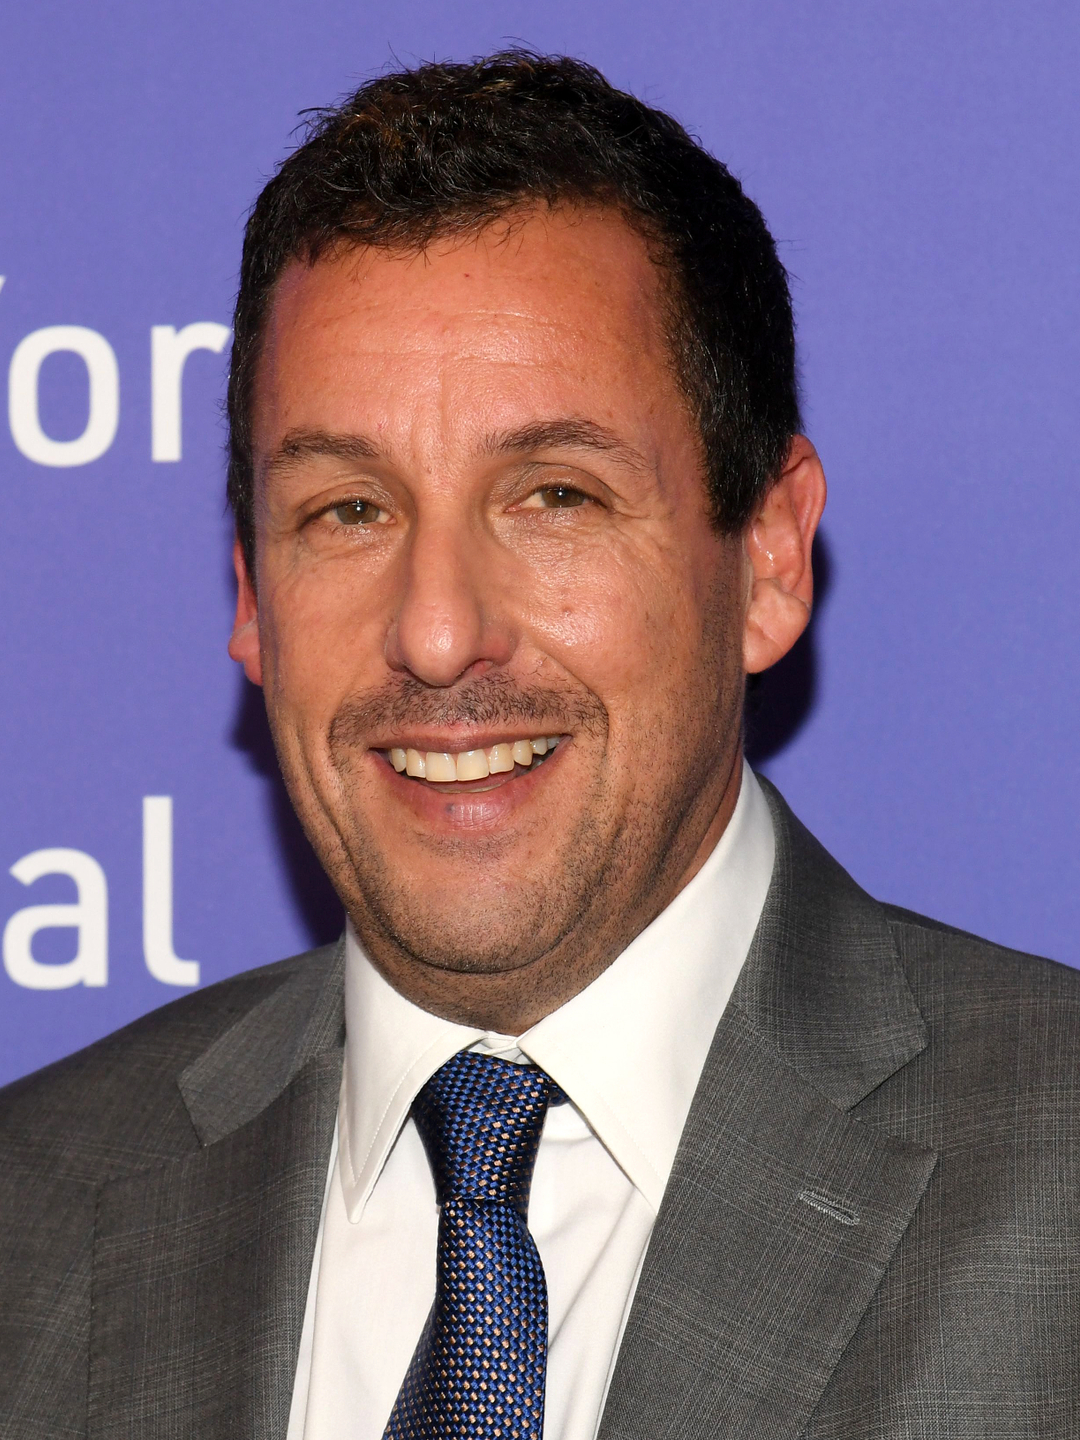 Adam Sandler in his youth